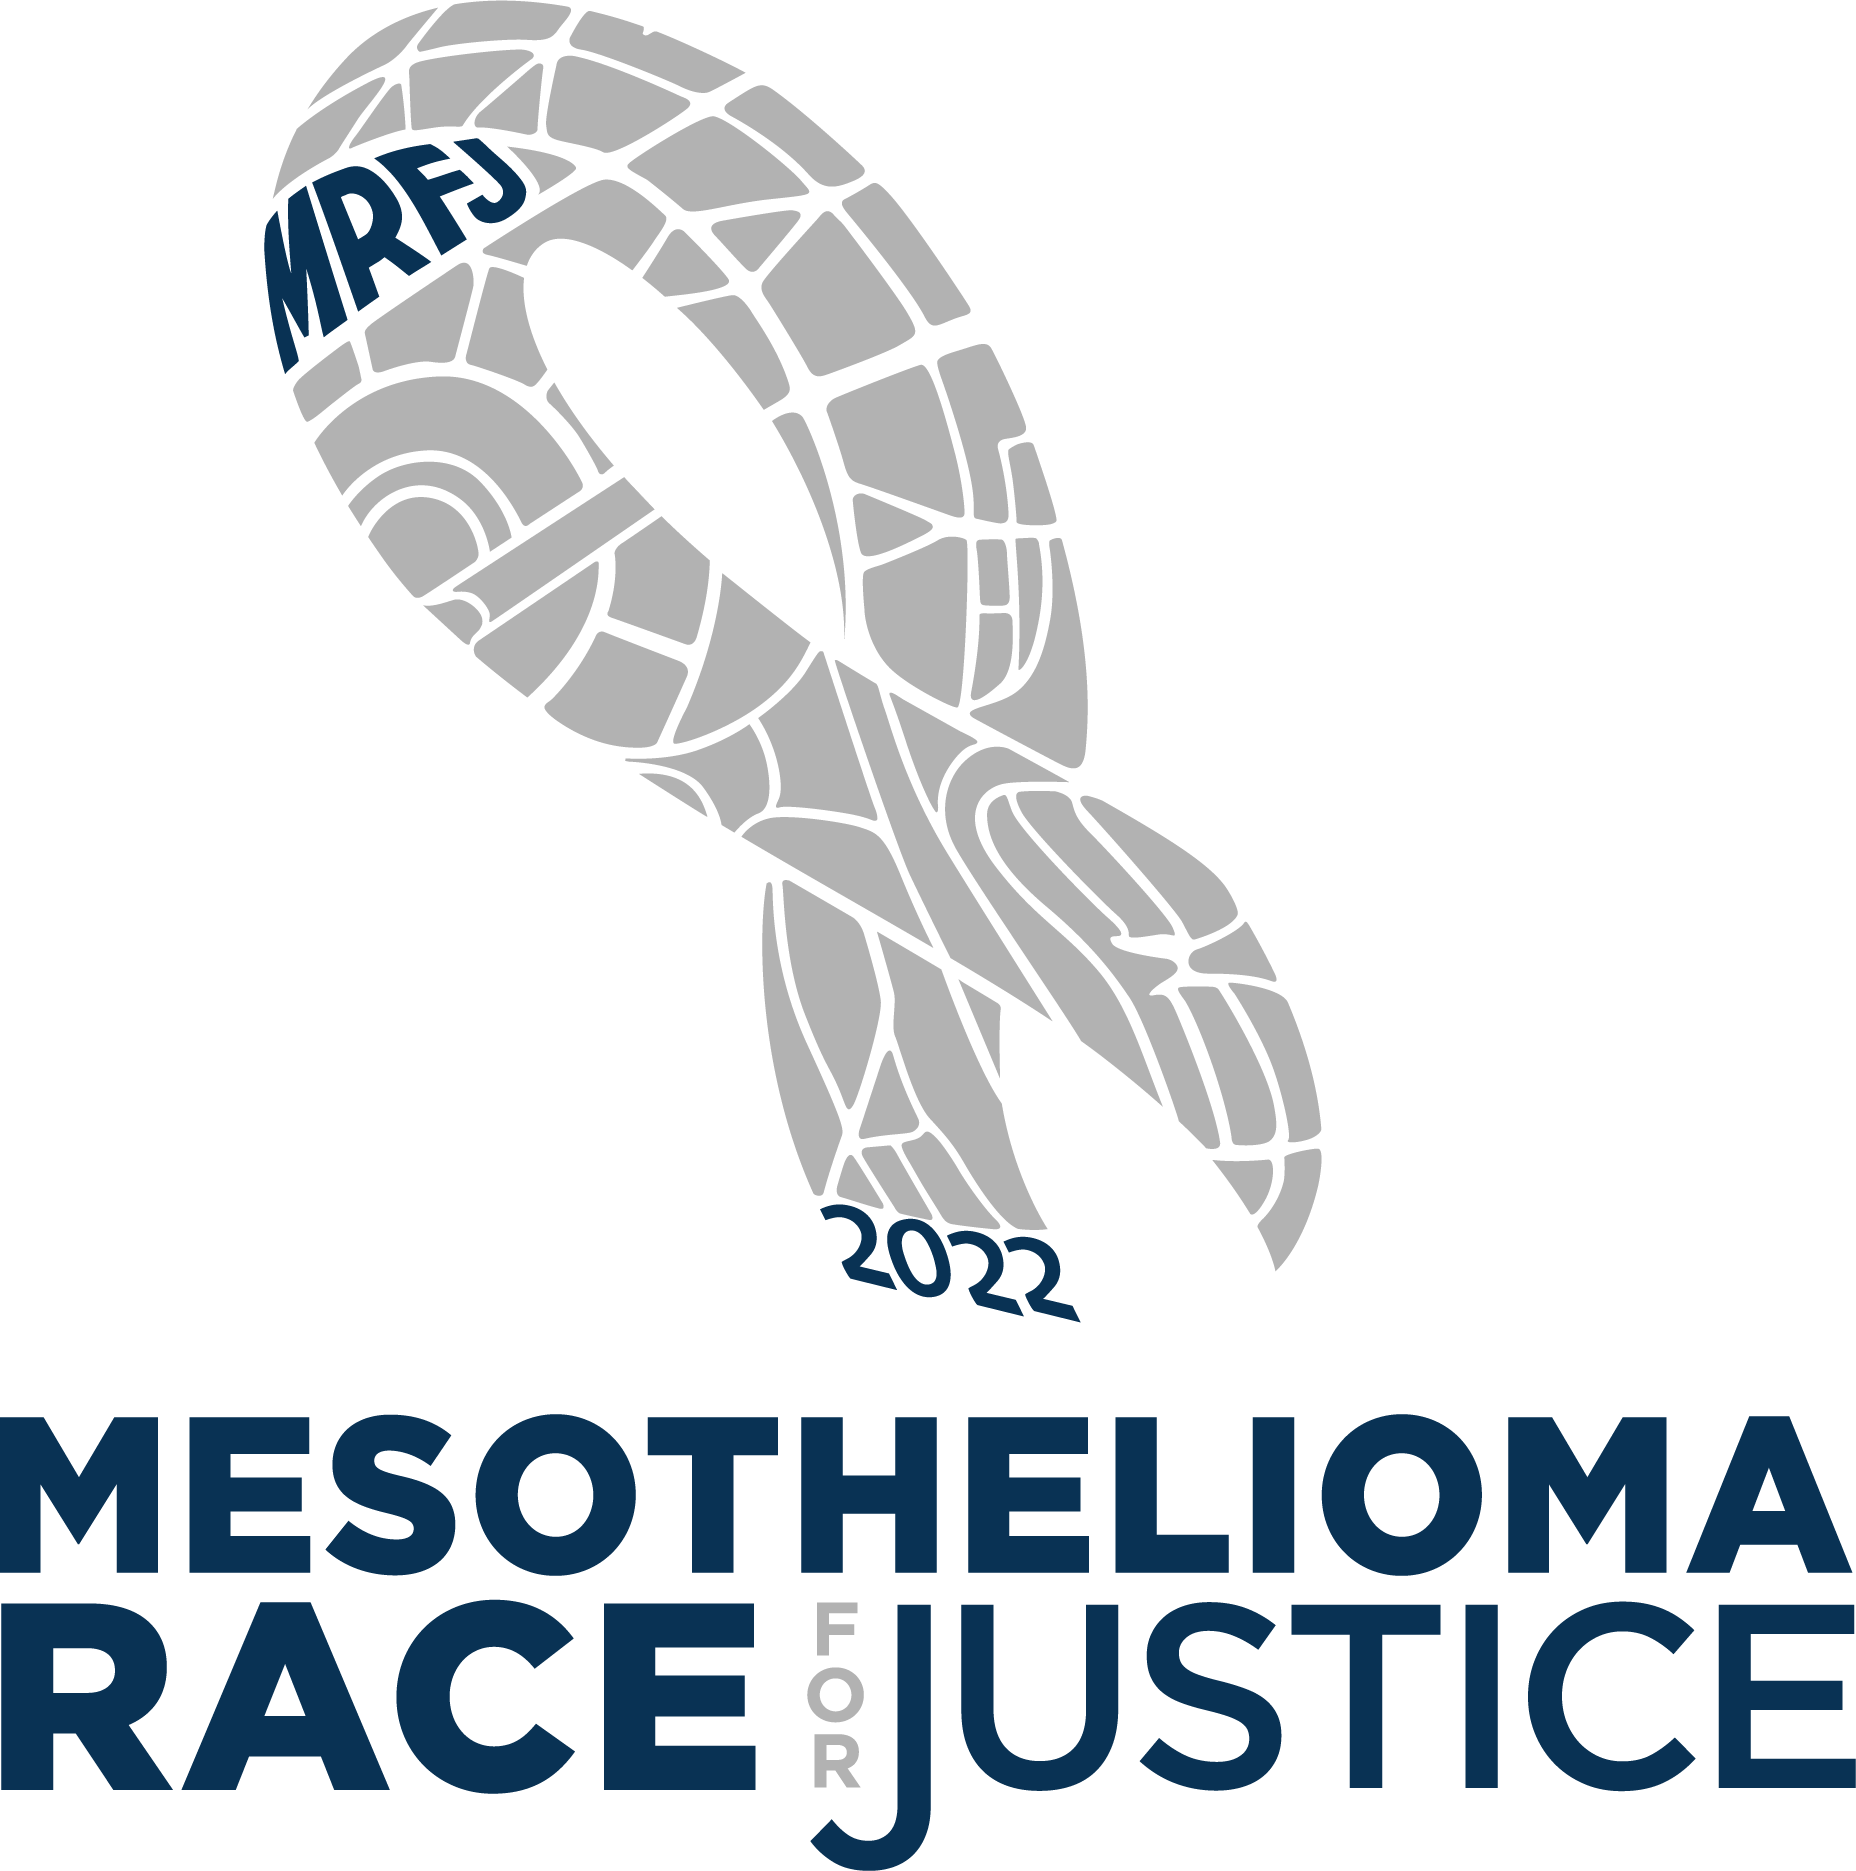 Mesothelioma Race for Justice 5K logo on RaceRaves